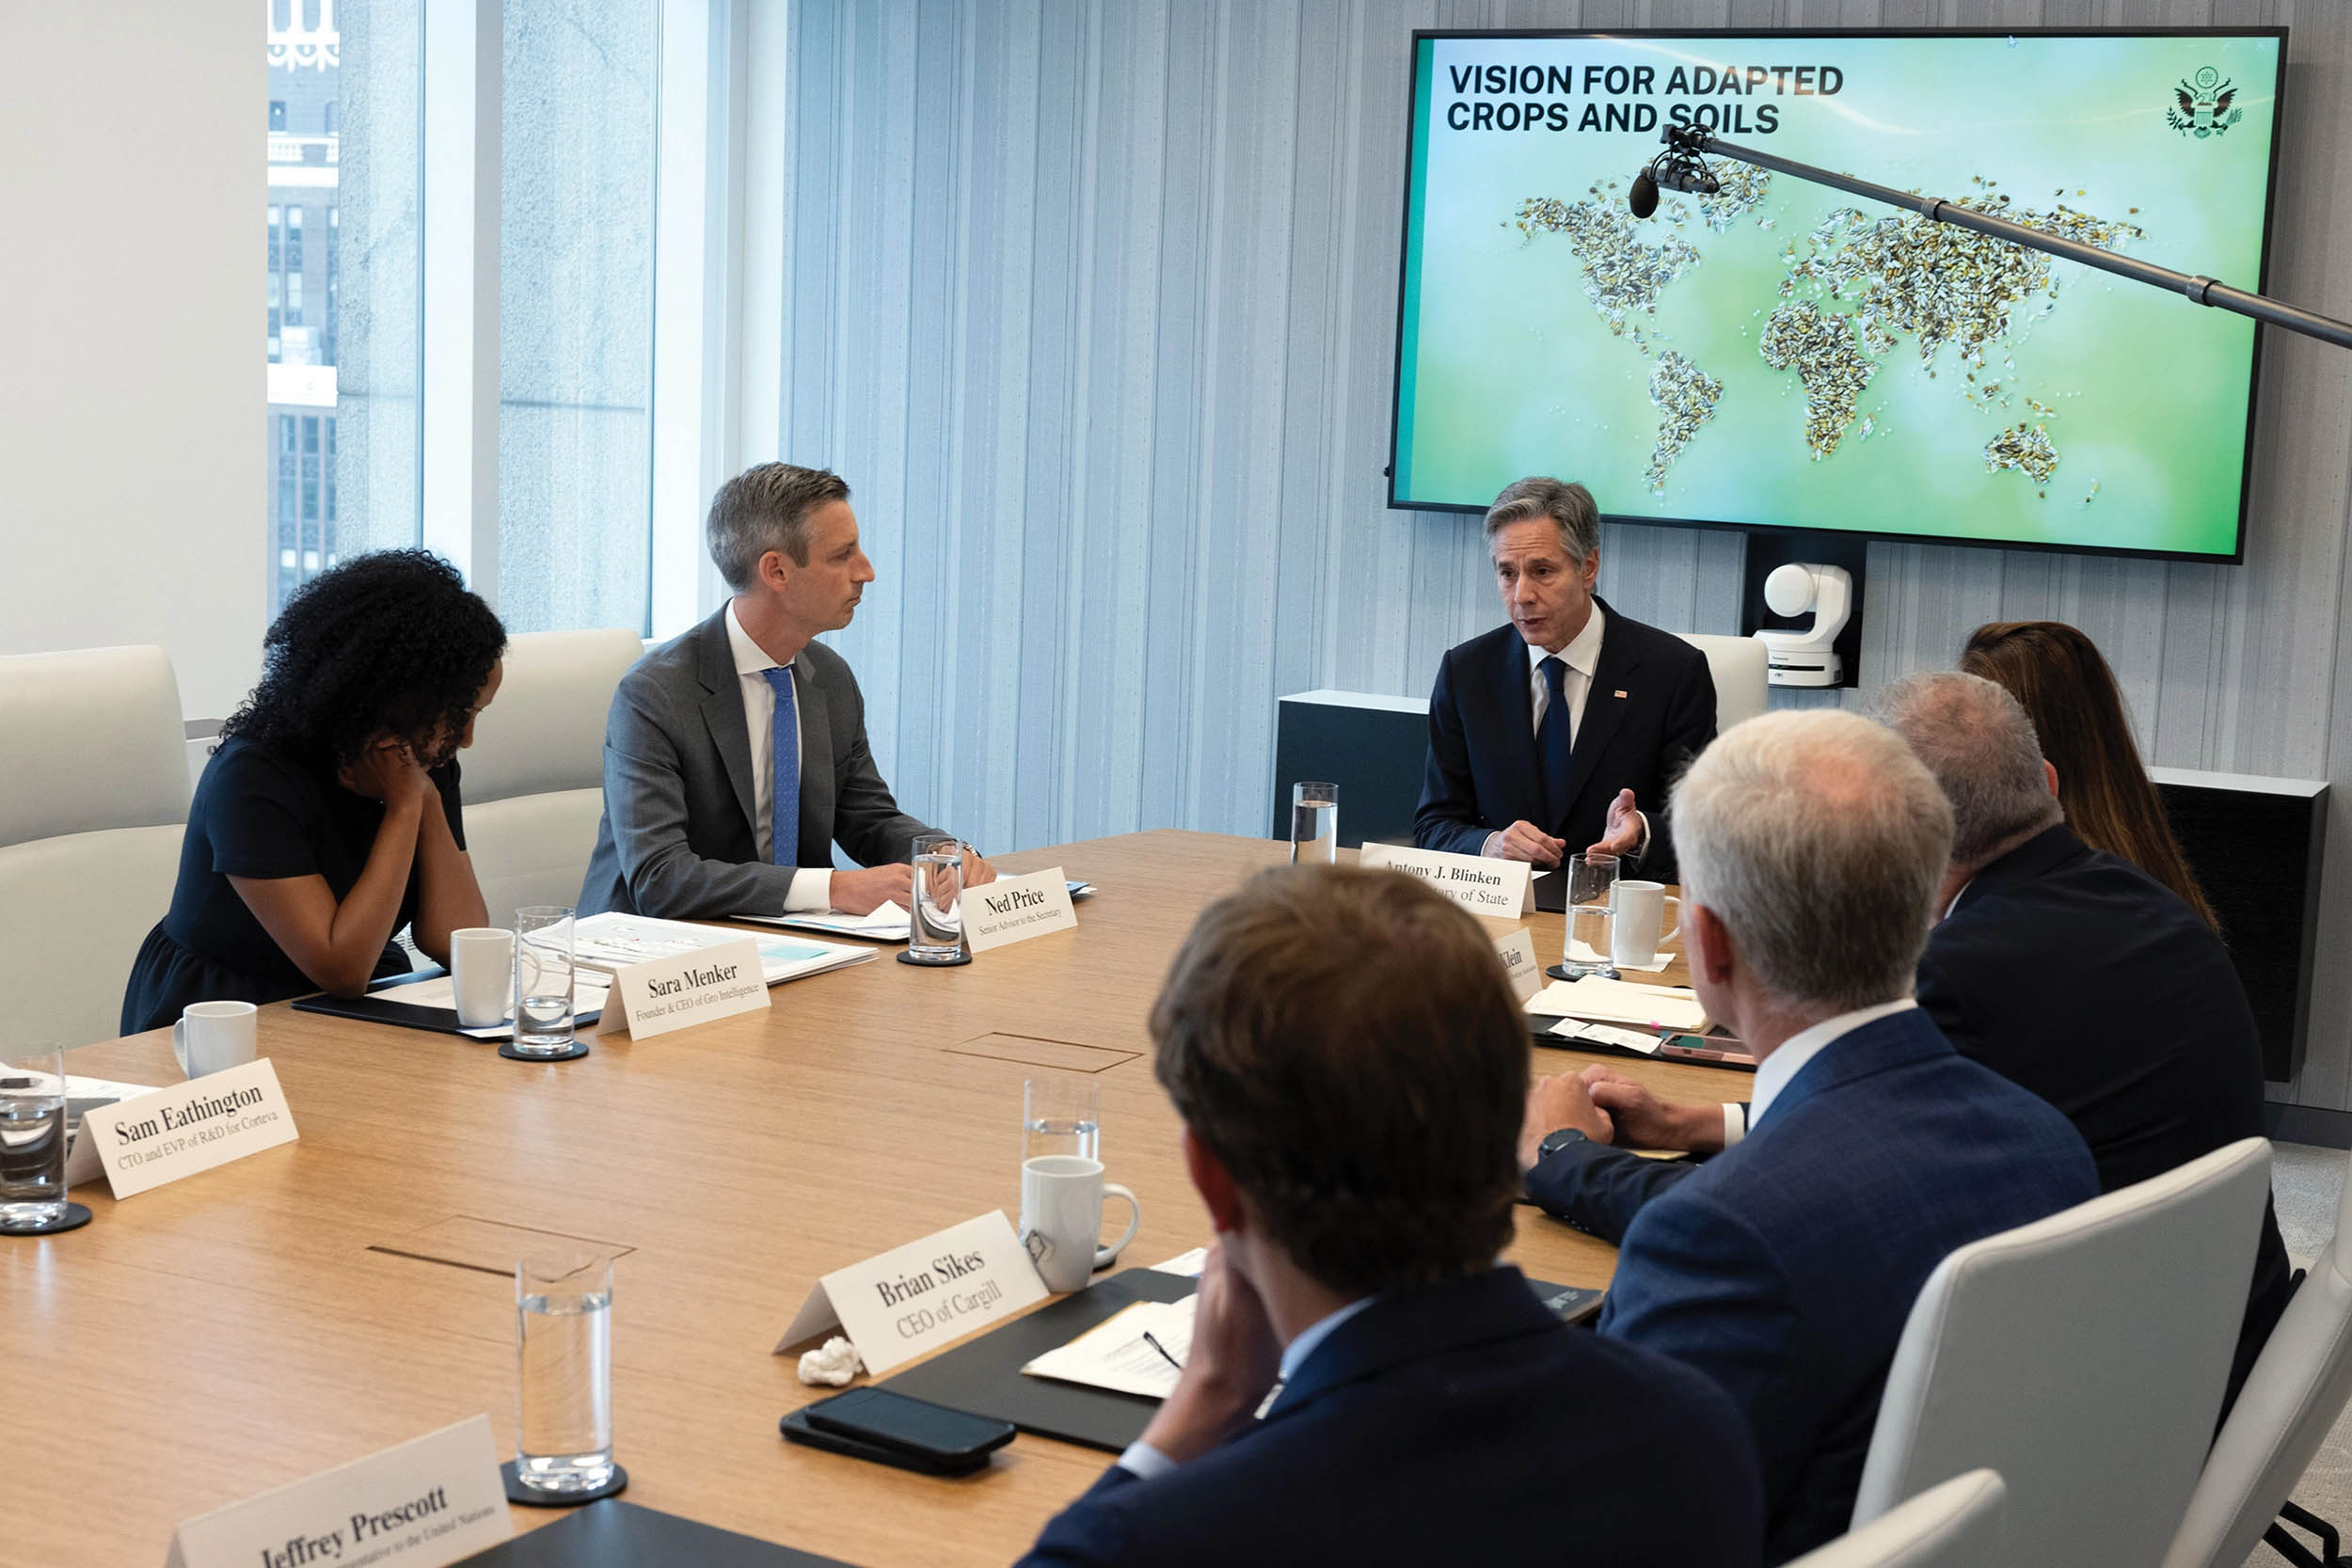 Secretary of State Antony Blinken participates in roundtable discussion on food security and Vision for Adapted Crops and Soils with agricultural leaders from public and private sectors, in New York City, August 4, 2023 (Department of State/Chuck Kennedy)